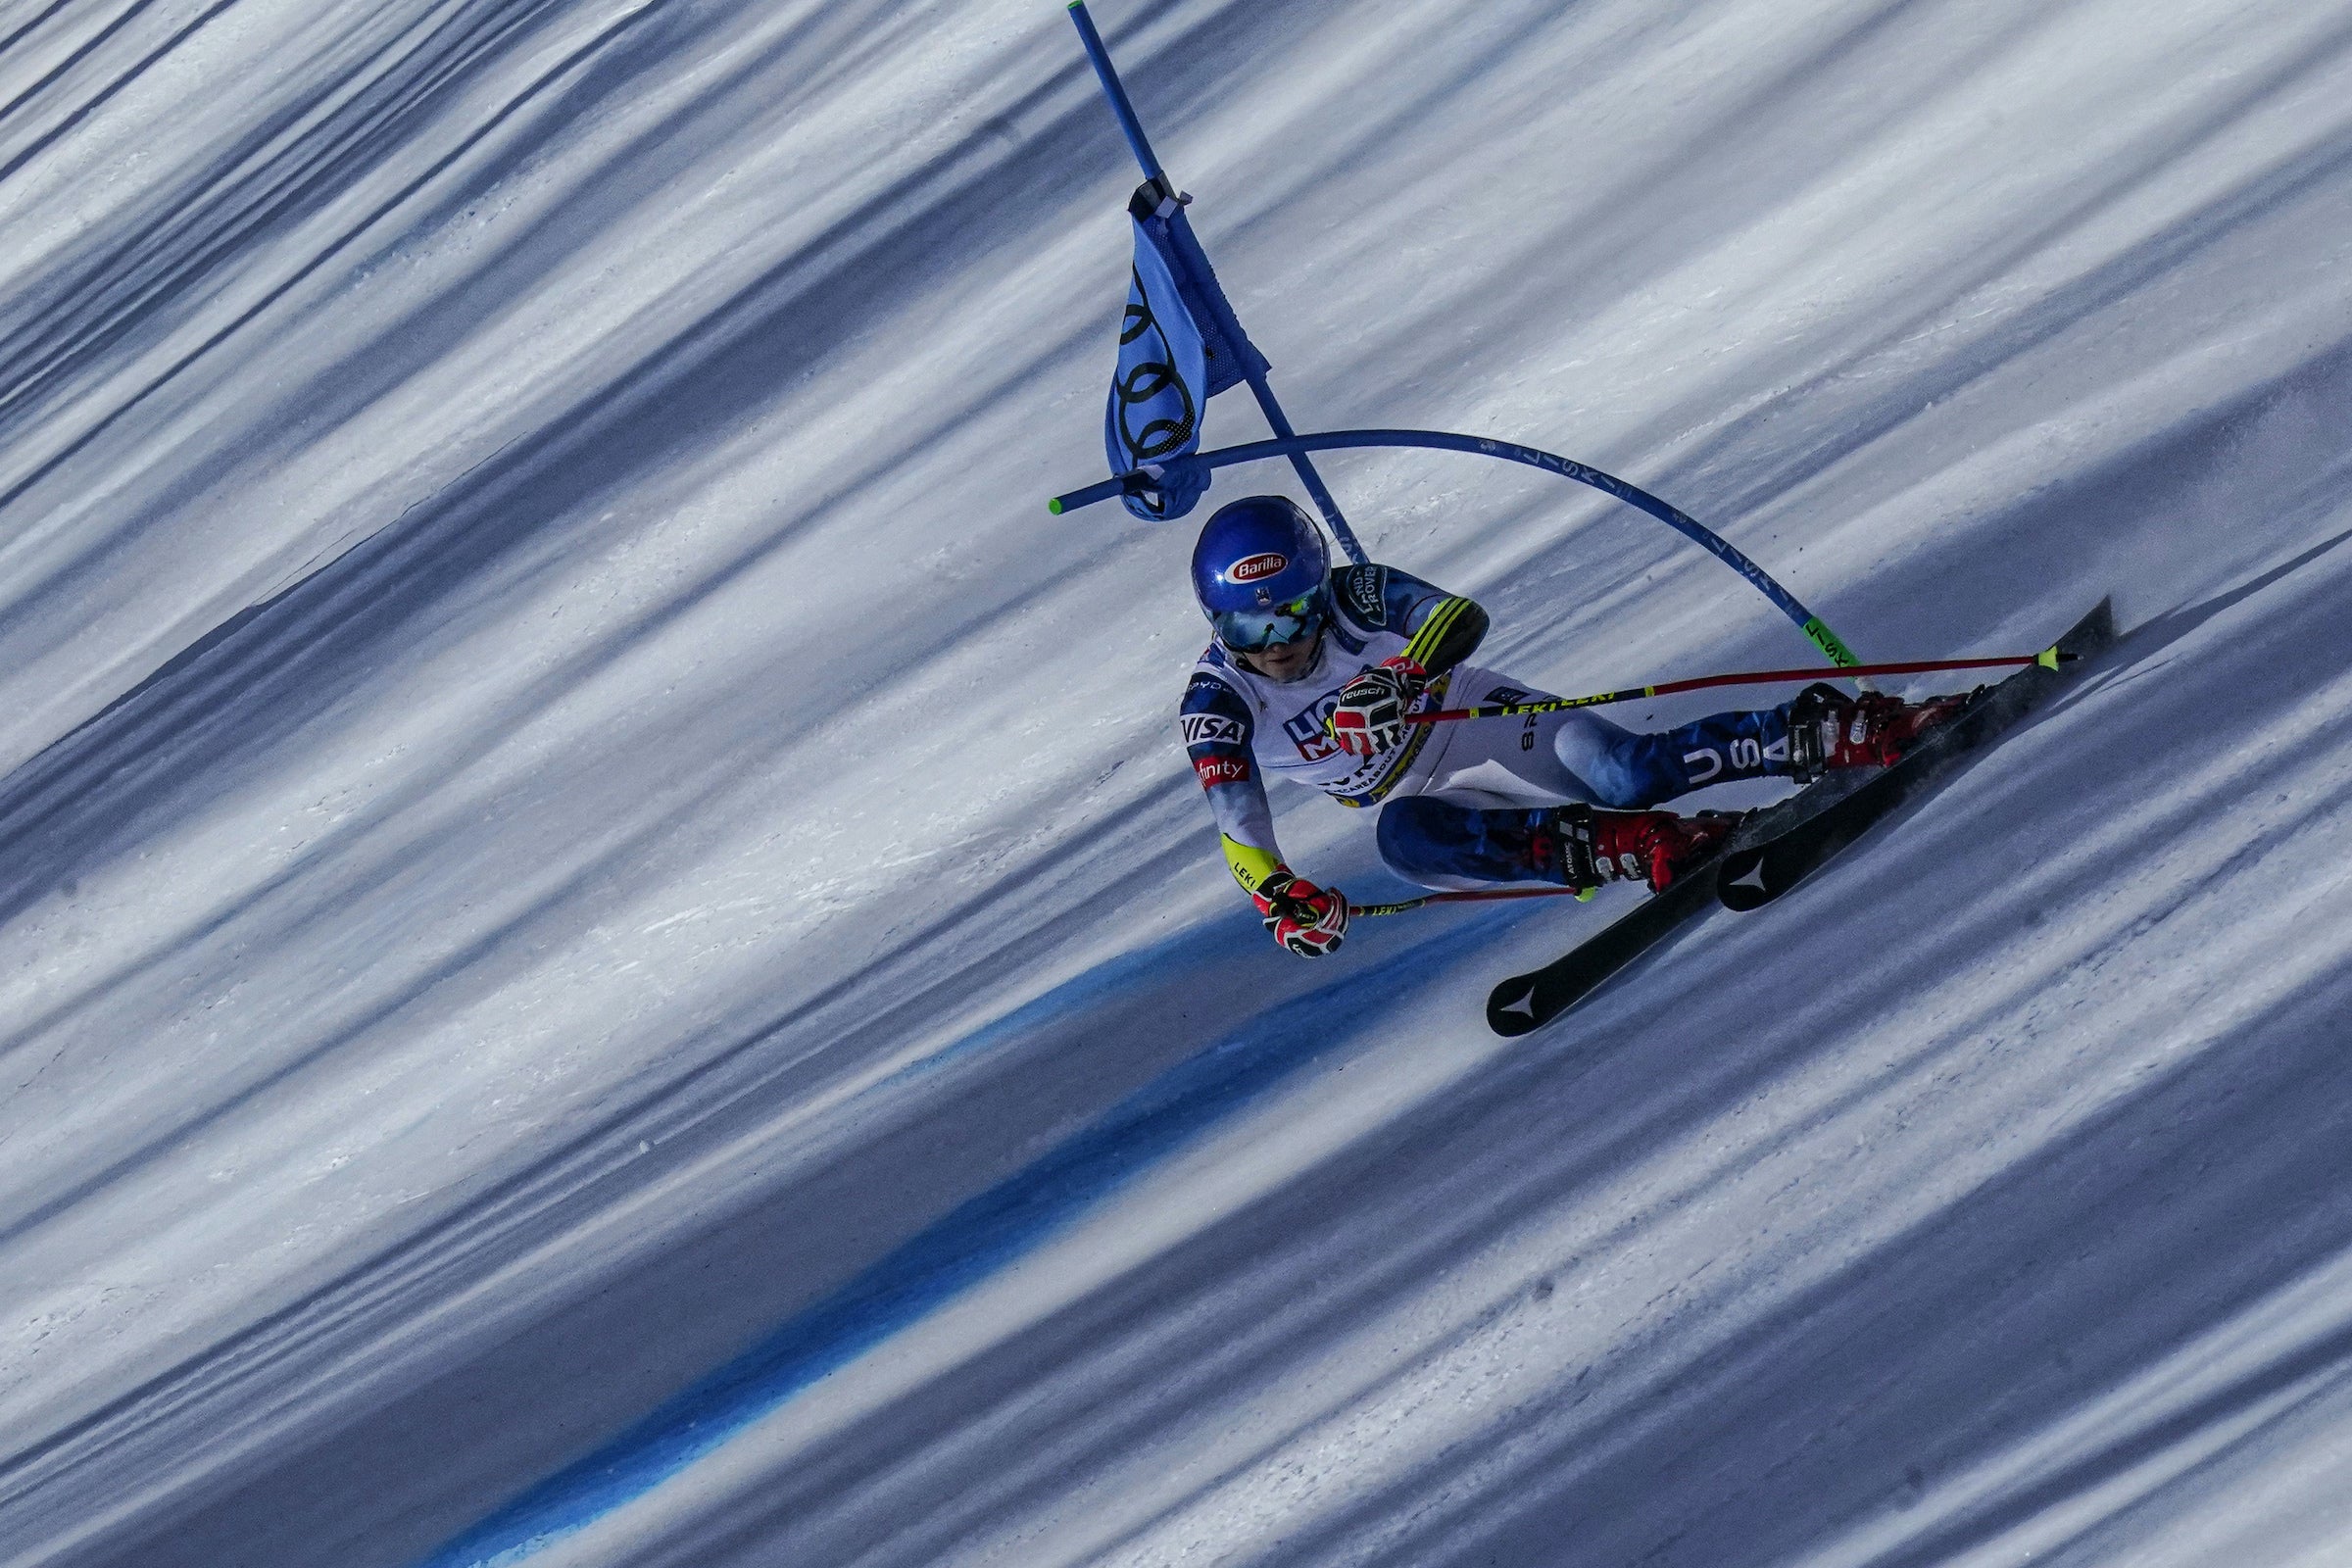 2022 Alpine World Cup Racing - Everything You Need to Know